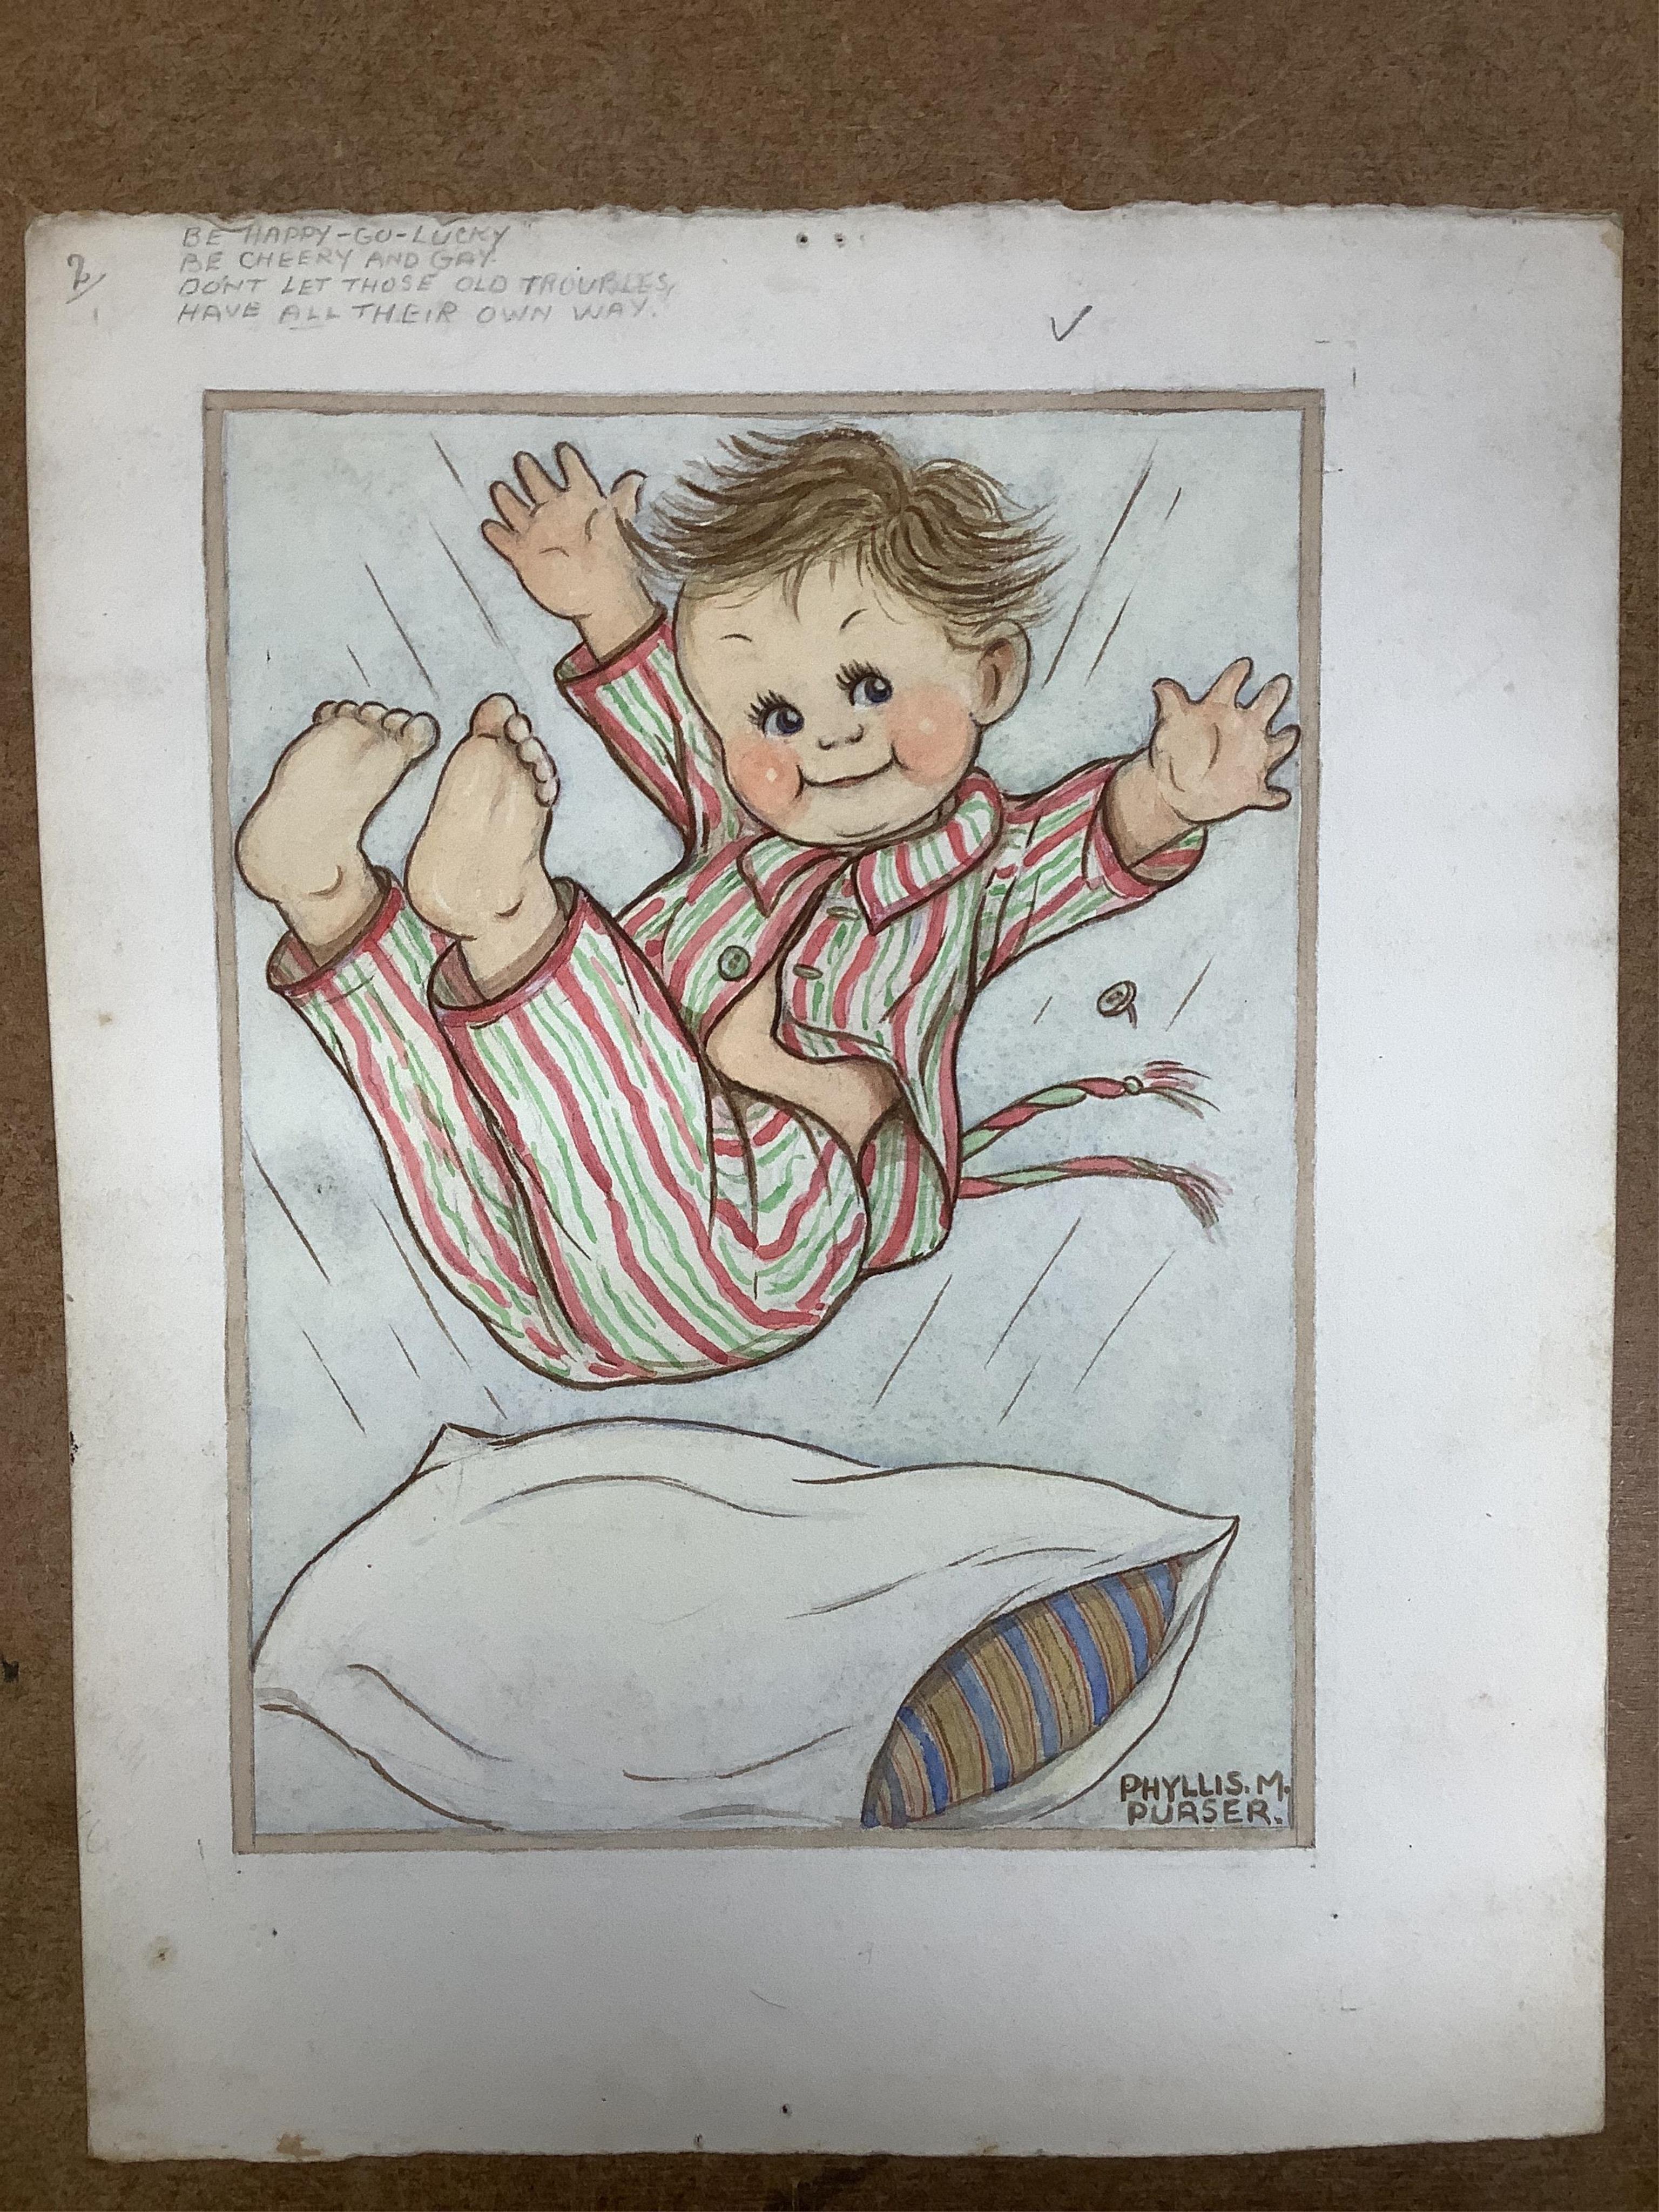 Phyllis Purser (1893-1990), six original watercolours on card for postcard designs, Humourous children, each signed, unframed, largest 39 x 28cm. Condition - fair, discolouration and creasing to the edges